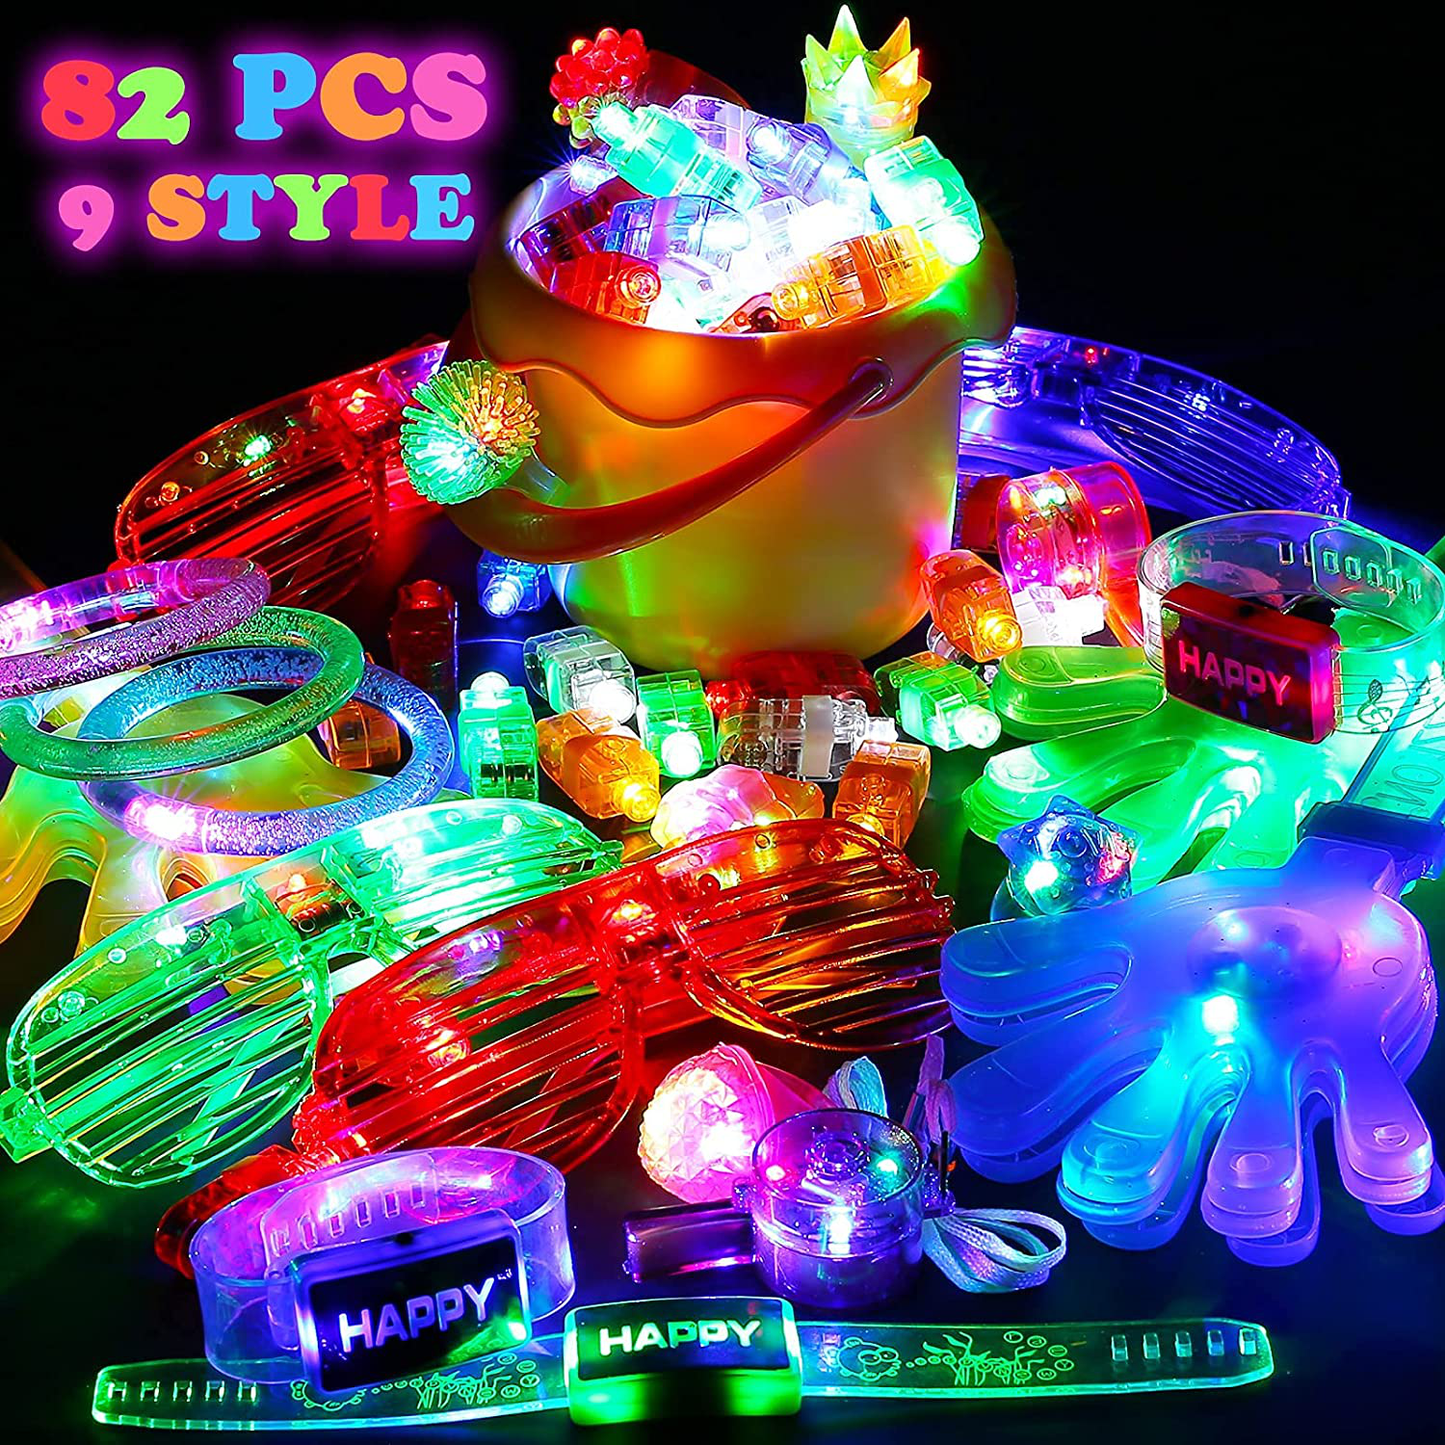 82Pcs LED Light up Toy Bulk Party Favors, Glow in the Dark Party Supplies for Boy Girl with 50 Finger Light,6 Jelly Ring, 6 Glasses,5 Spinning Top, 3 Bracelet,3 Hairpin, 3 Whistle, 3 Hand Clap,3 Watch